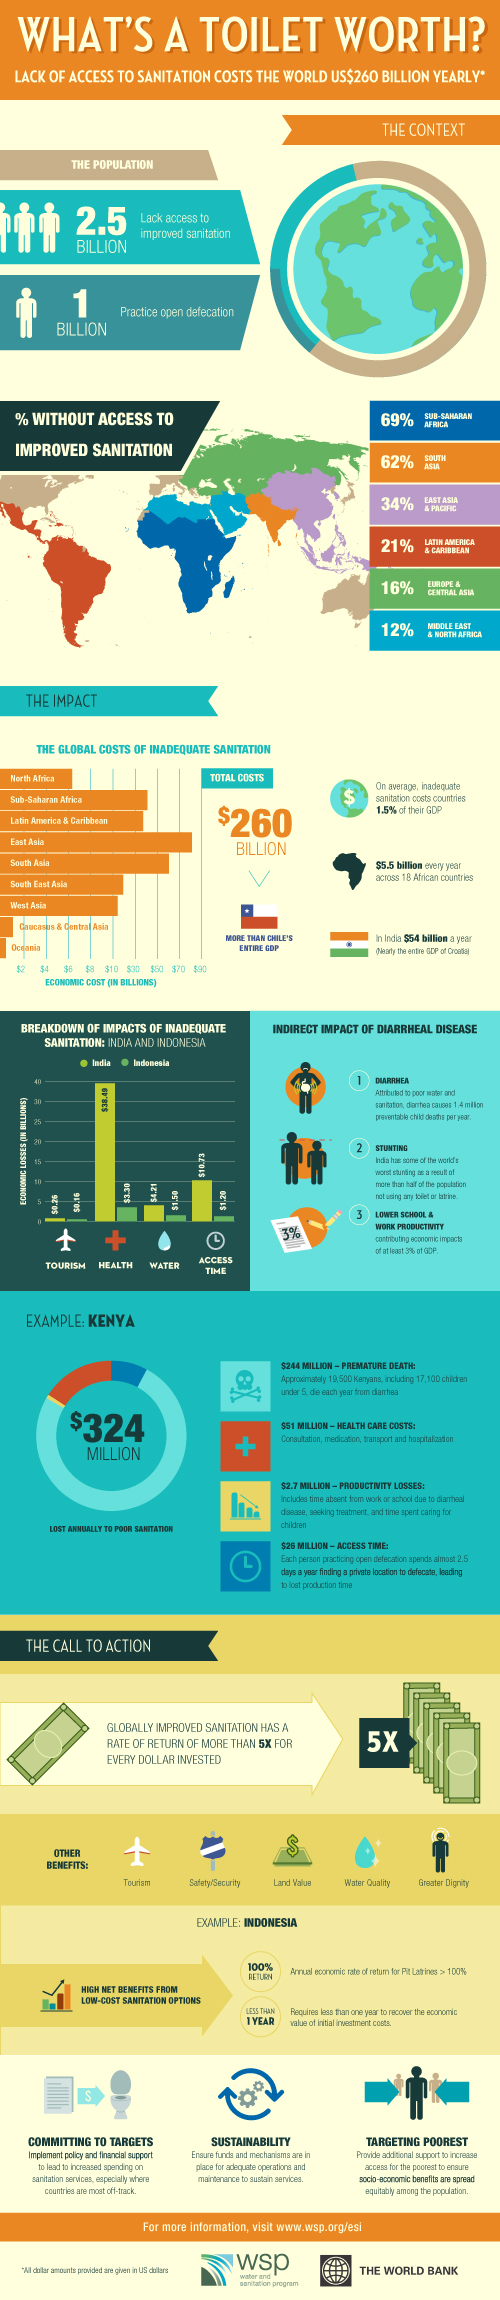 Infographic: What&#039;s a Toilet Worth? - A beautiful info graphic produced by World Bank - http://bit.ly/1qINW37